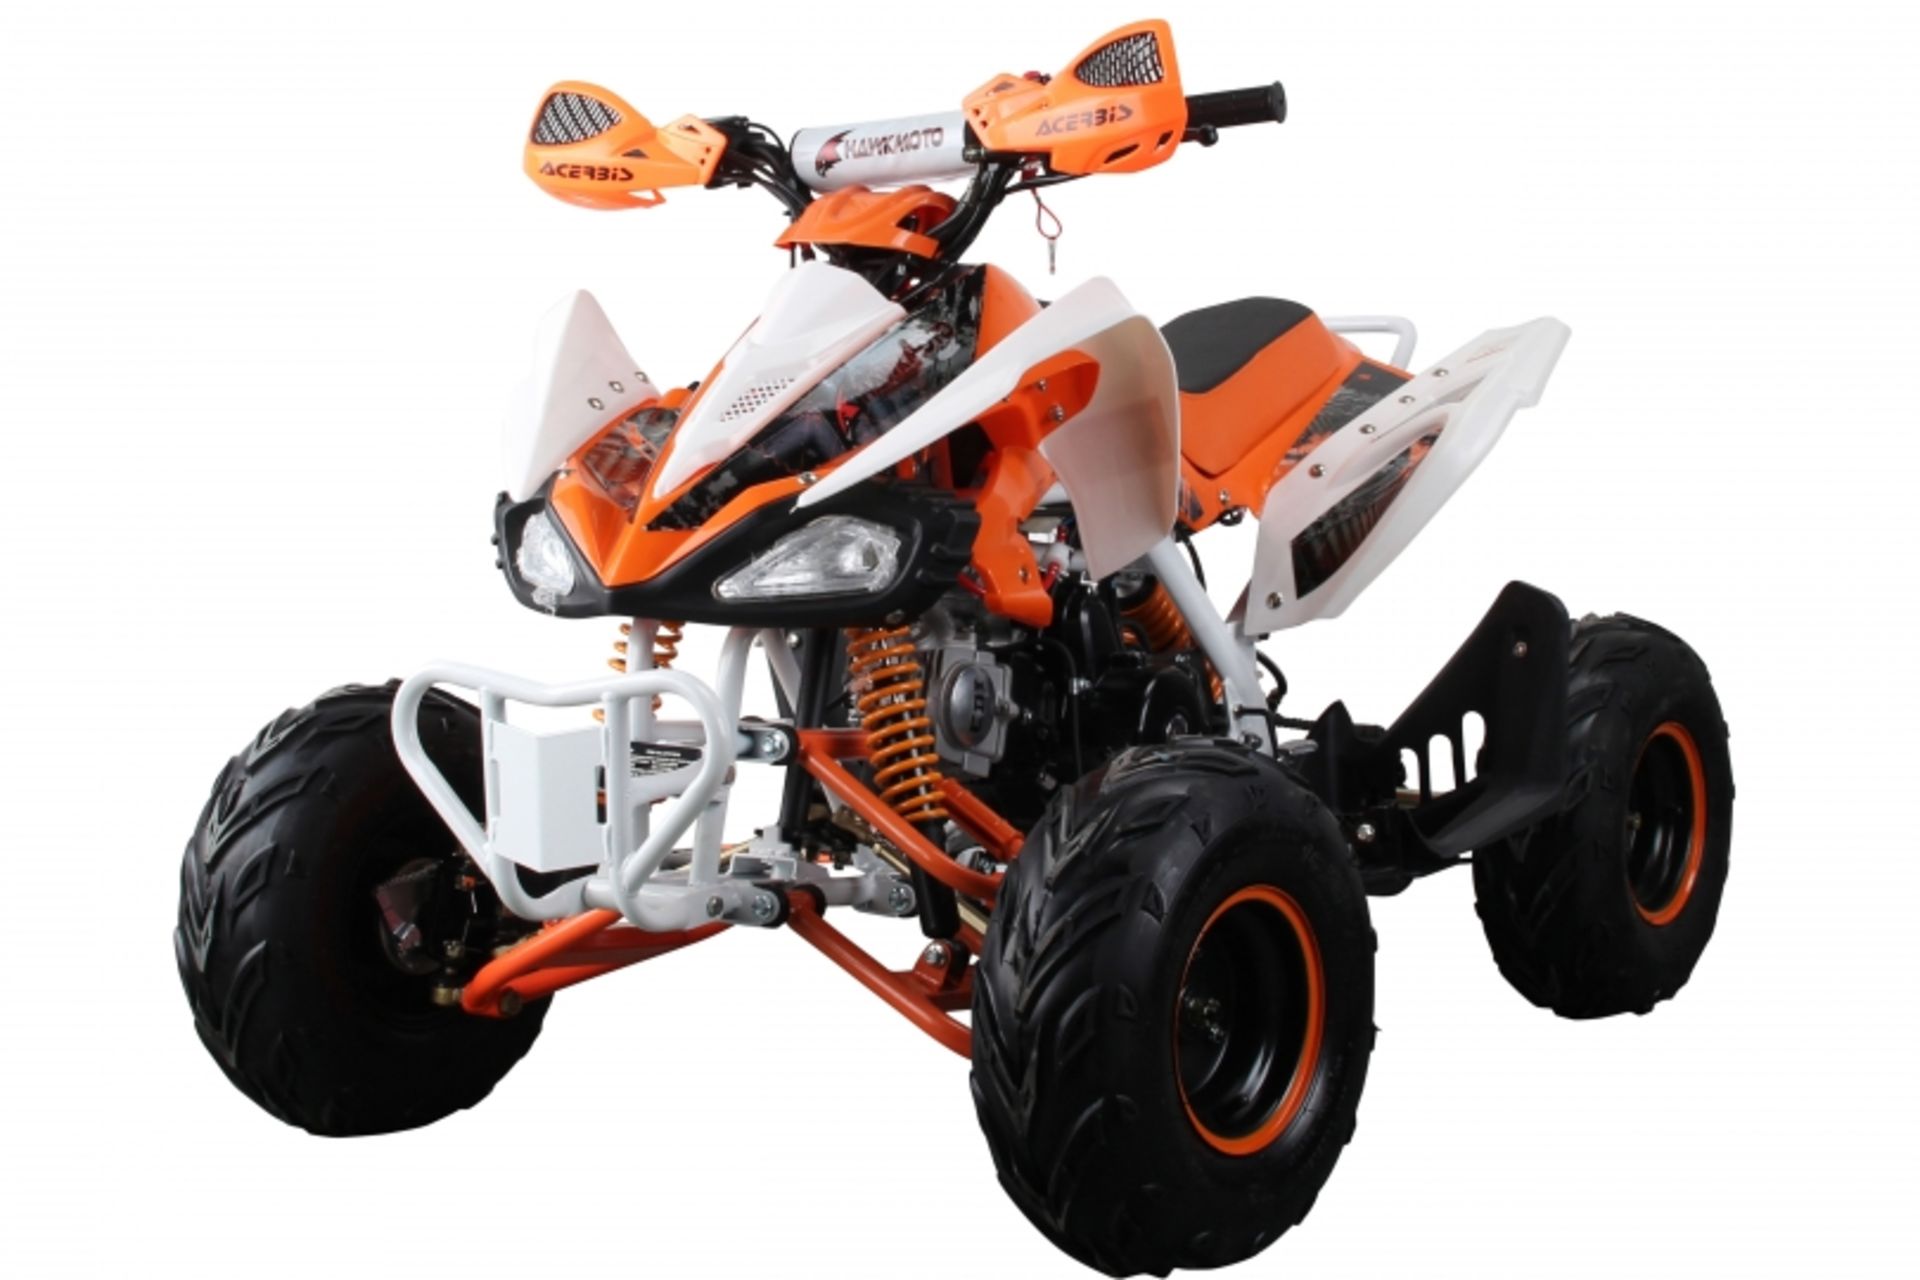 V Brand New 125cc Interceptor SV2 4 Stroke Quad Bike With Reverse Gear - Double Front Suspension/ - Image 2 of 4